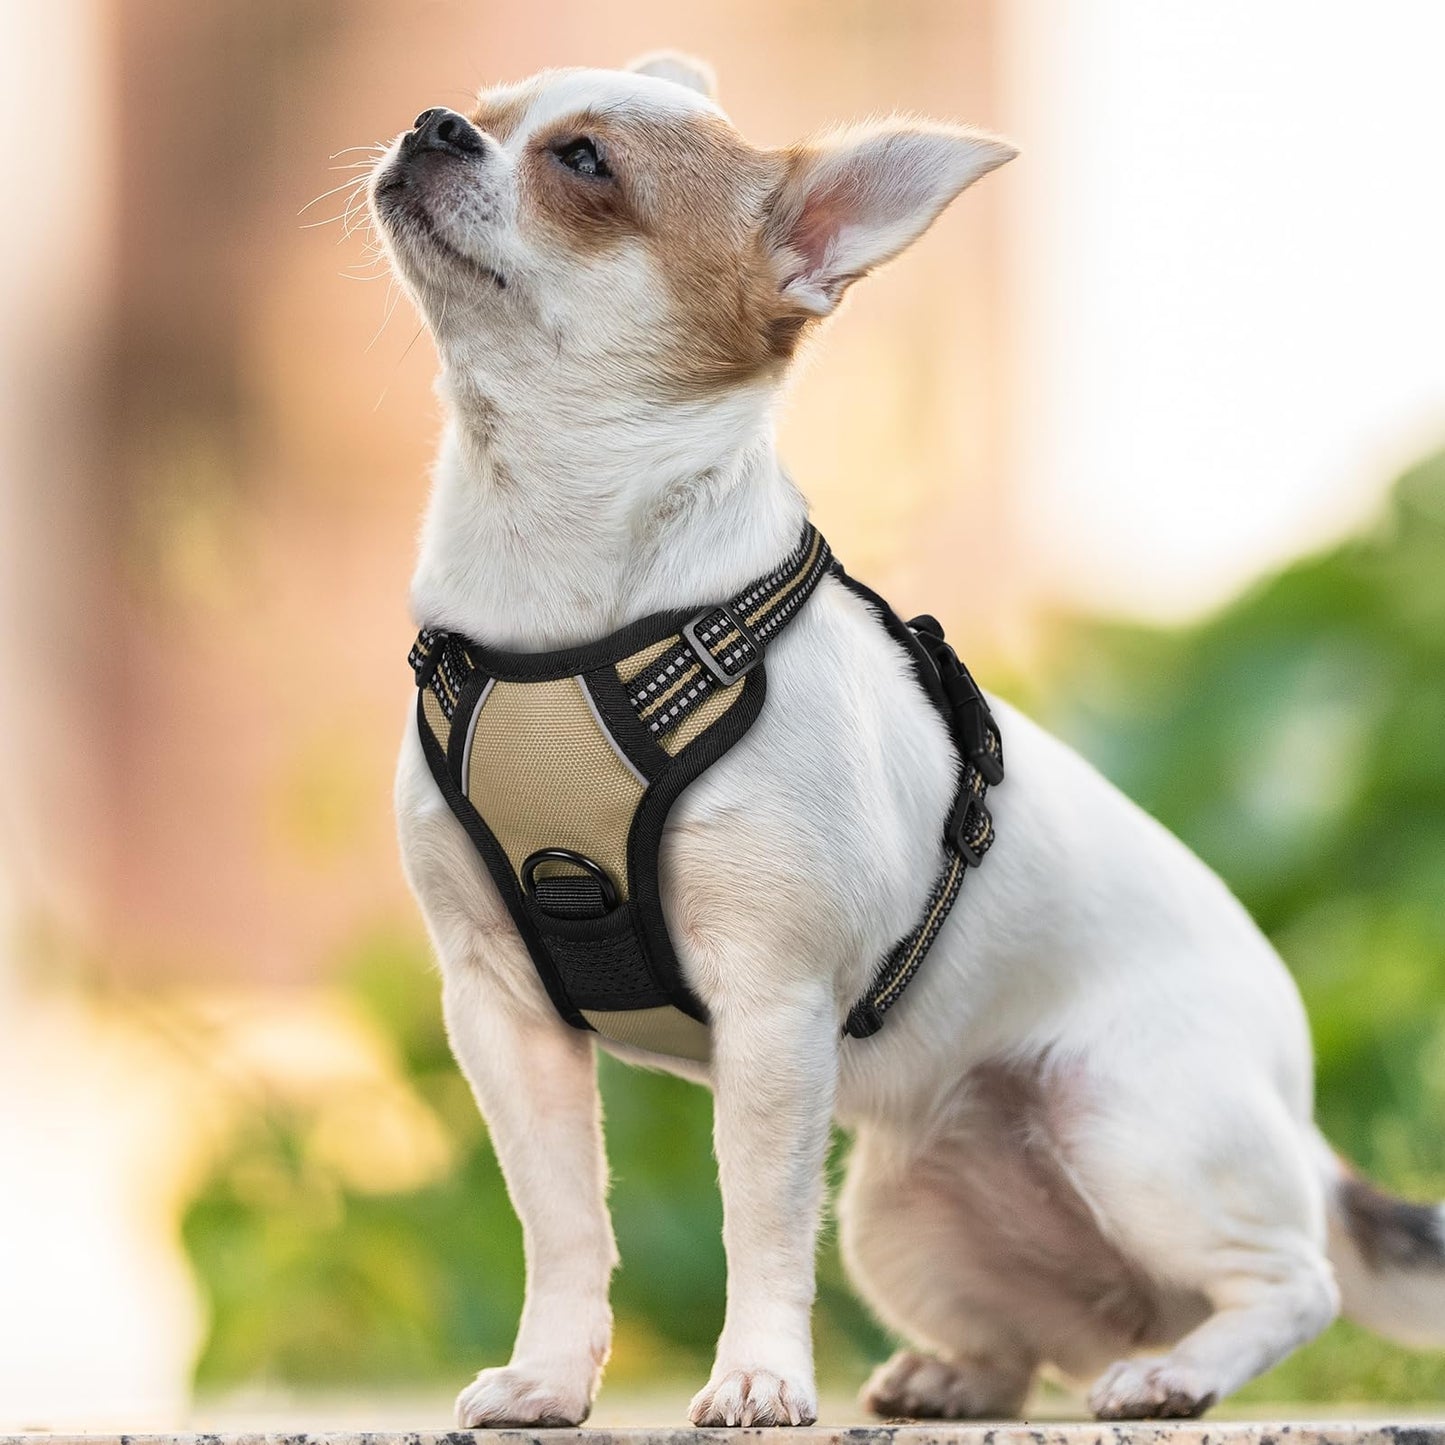 rabbitgoo Dog Harness, No-Pull Pet Harness with 2 Leash Clips, Adjustable Soft Padded Dog Vest